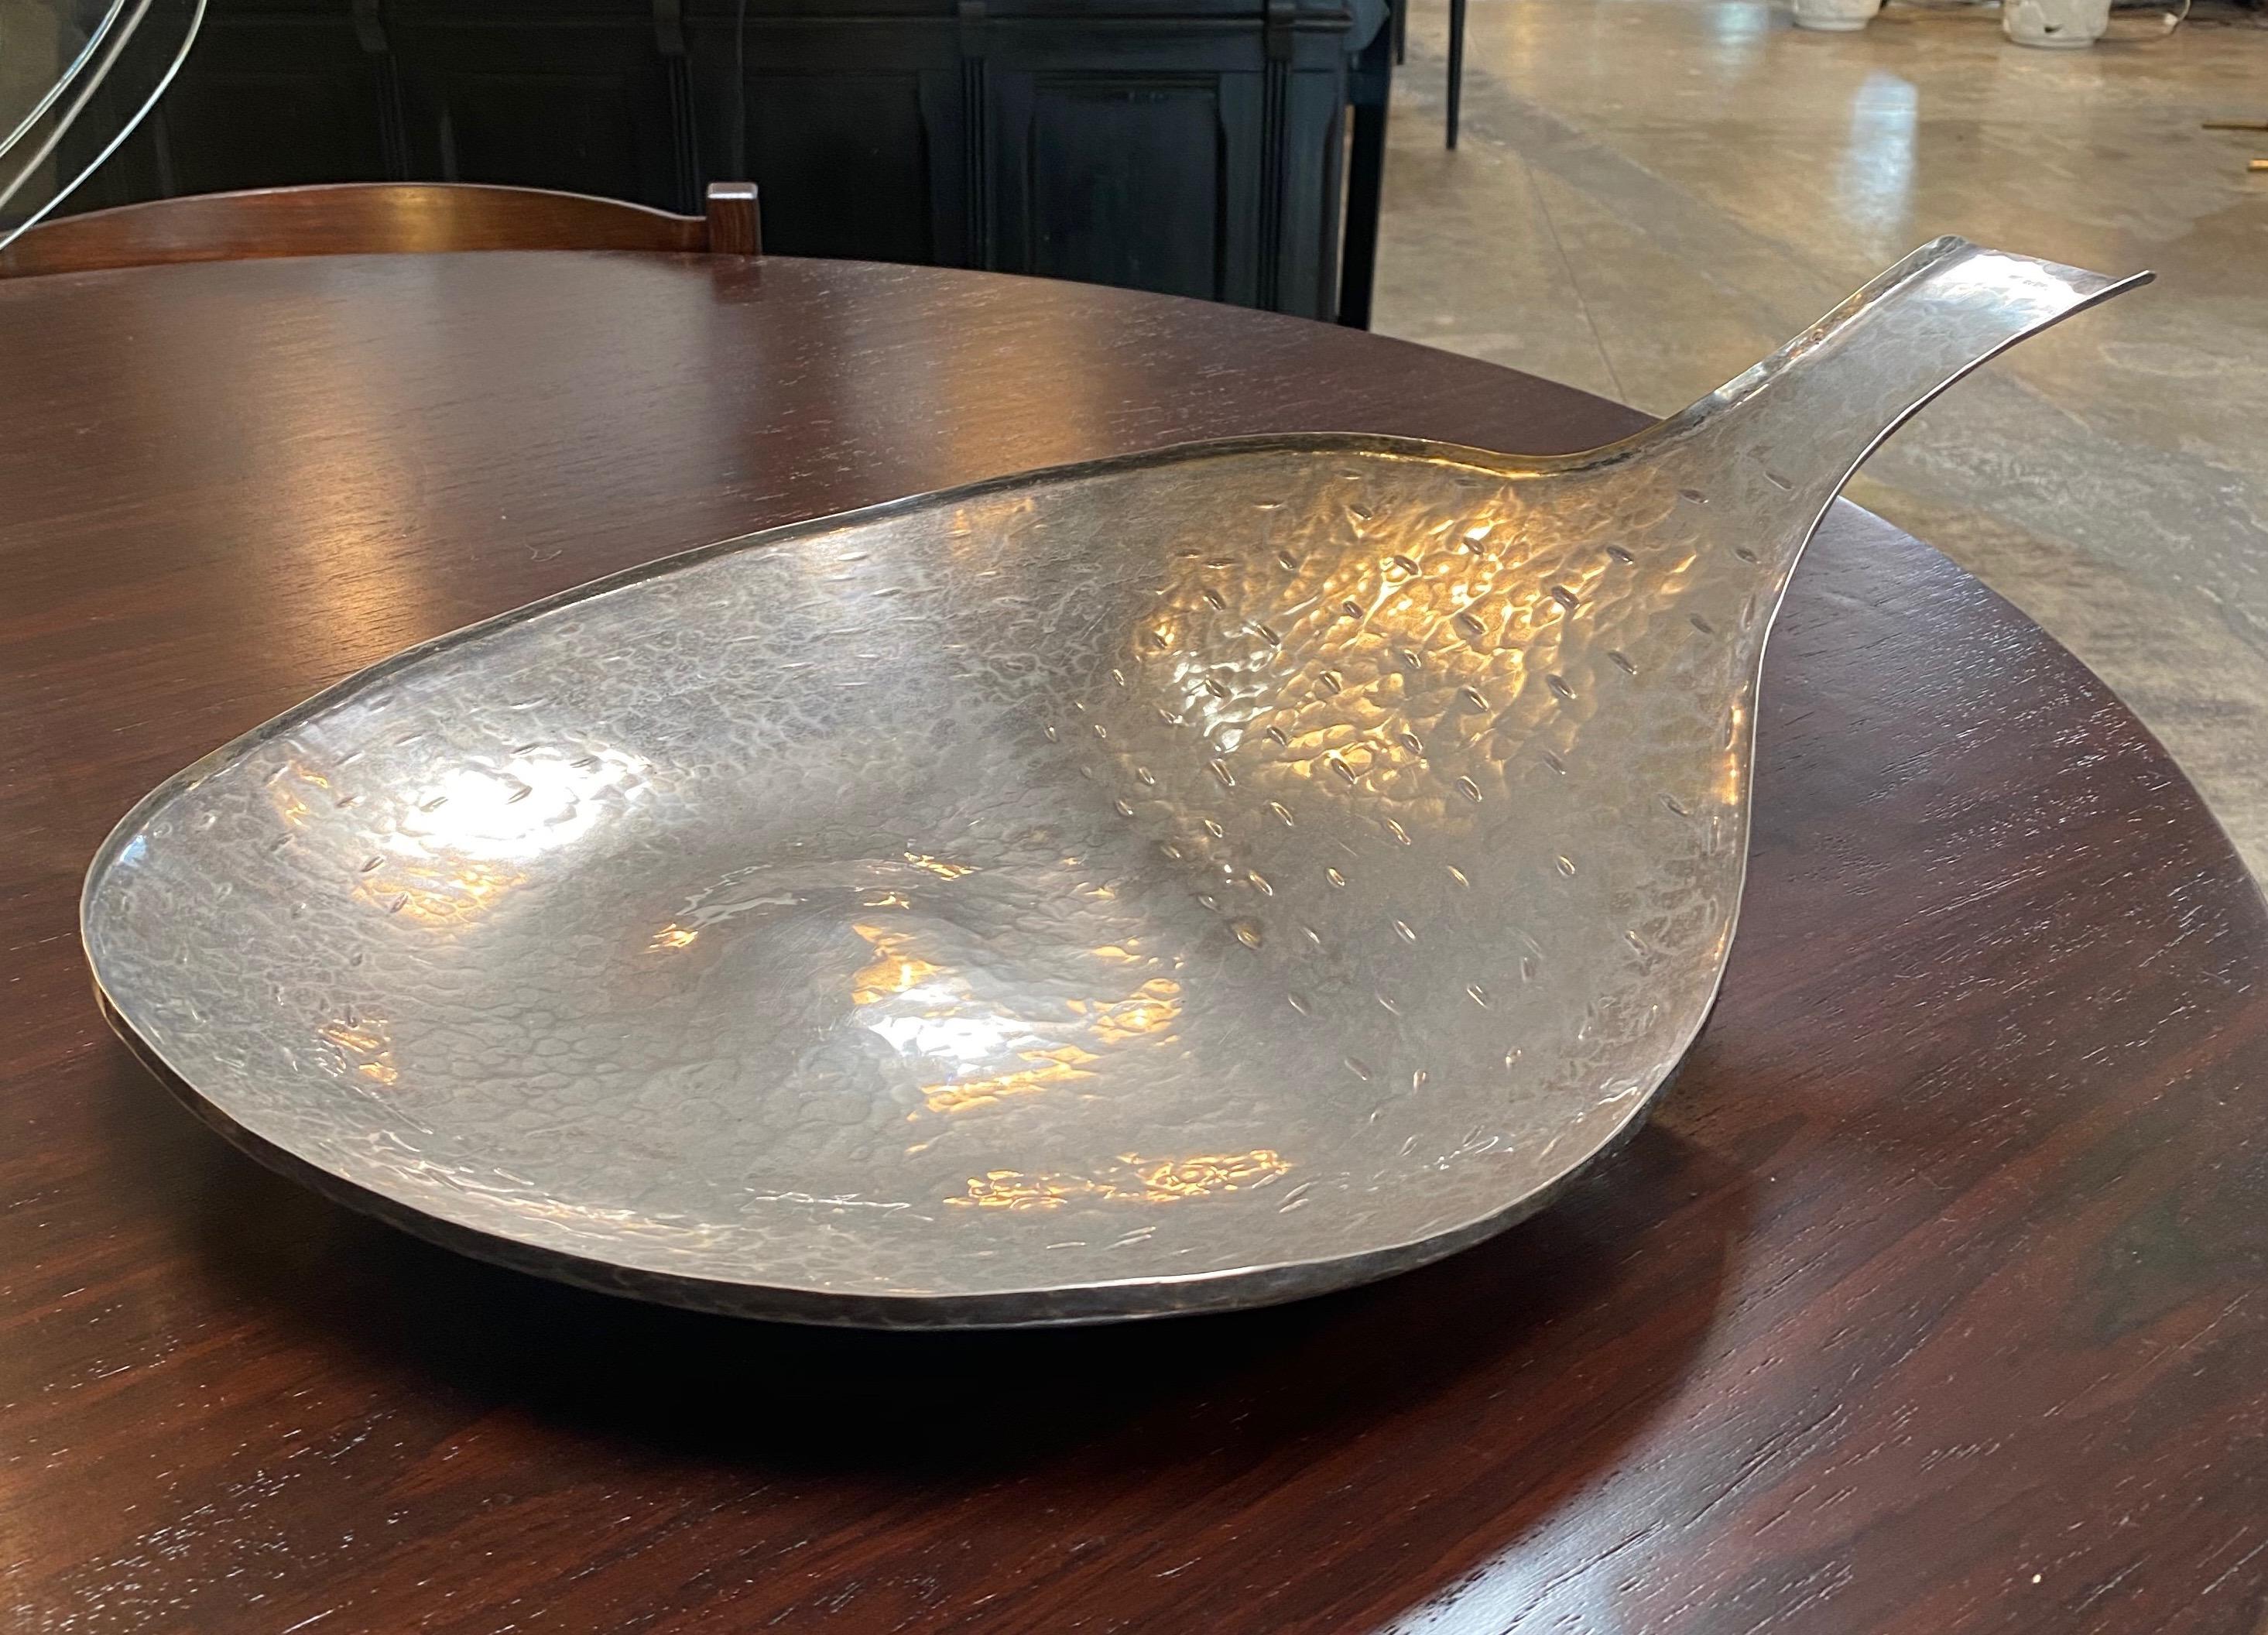 Italian hammered solid silver bowl or tray, 1950s
Unique oval shaped with a single handle .